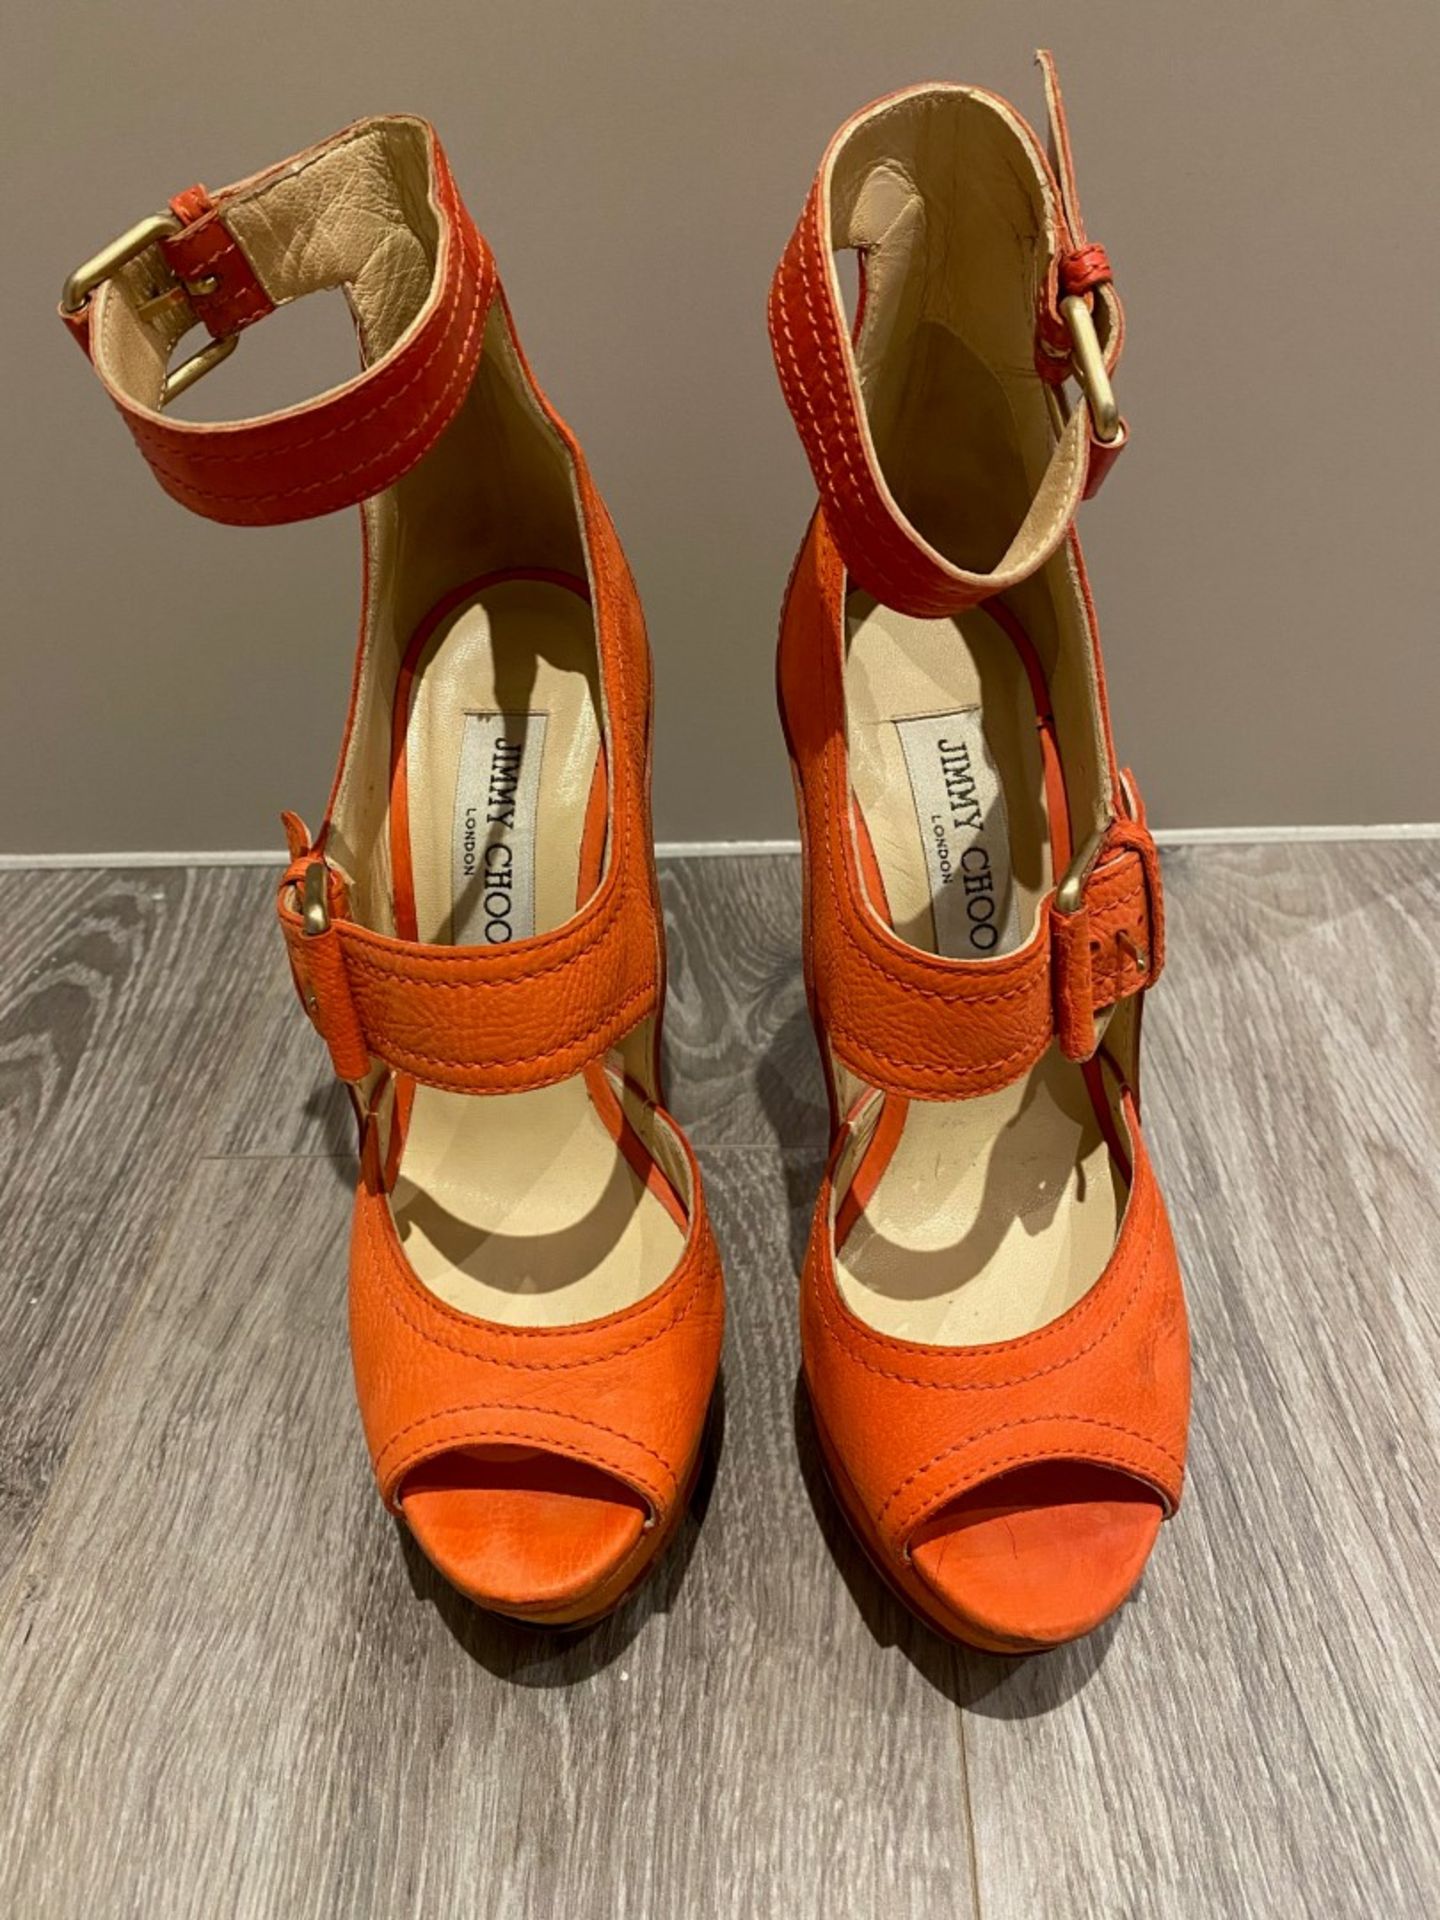 1 x Pair Of Genuine Jimmy Choo High Heel Shoes In Orange - Size: 36 - Preowned in Good Condition - R - Image 3 of 5